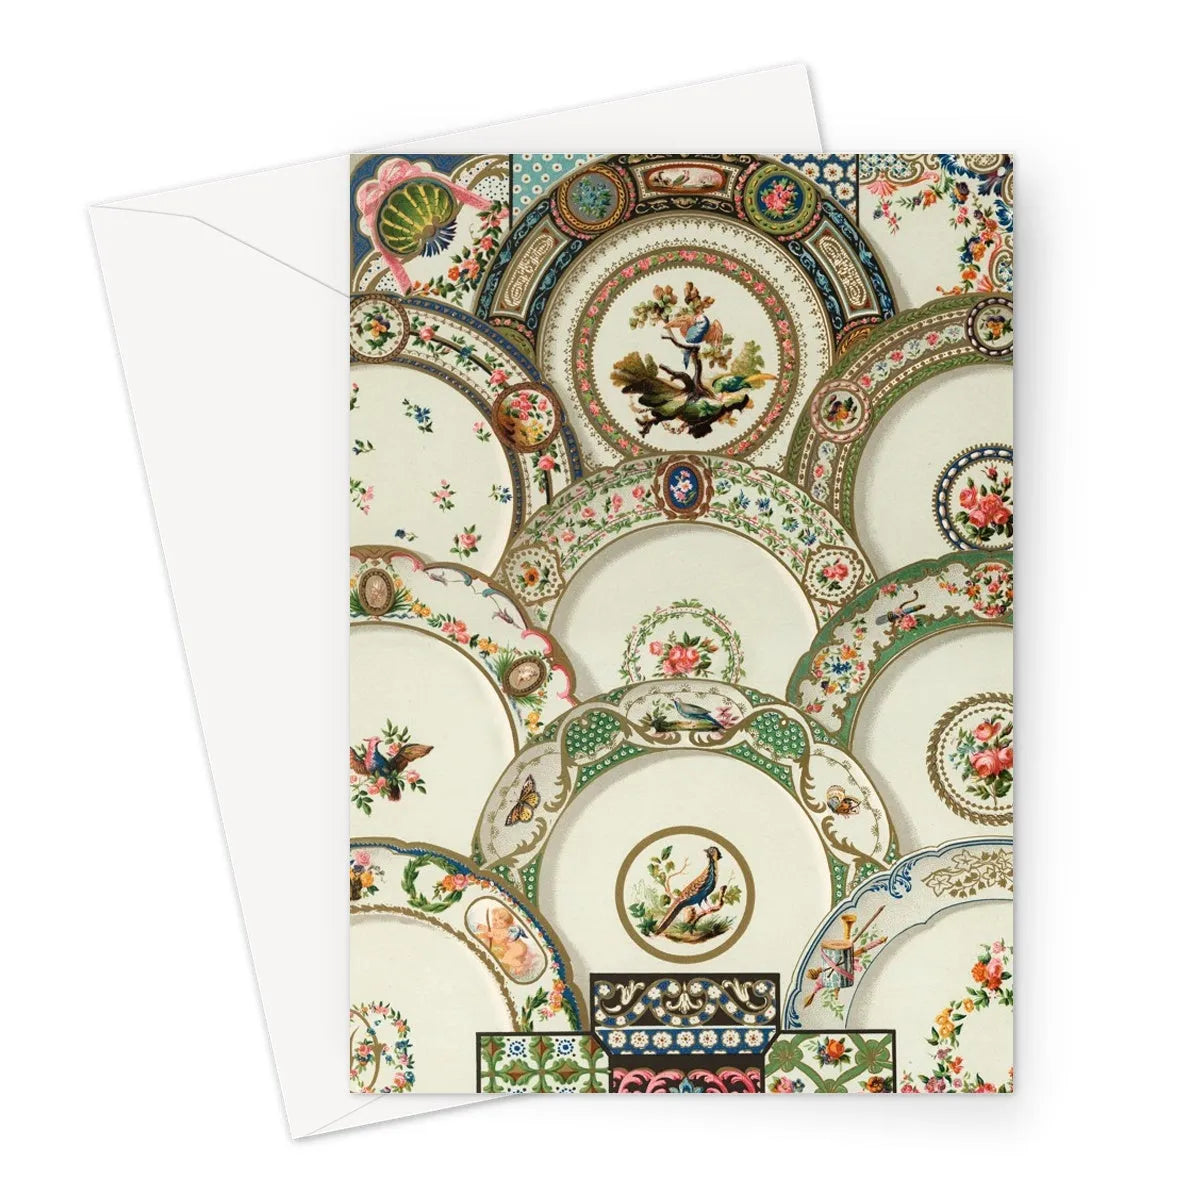 Decorative Plates By Auguste Racinet Greeting Card - A5 Portrait / 1 Card - Notebooks & Notepads - Aesthetic Art